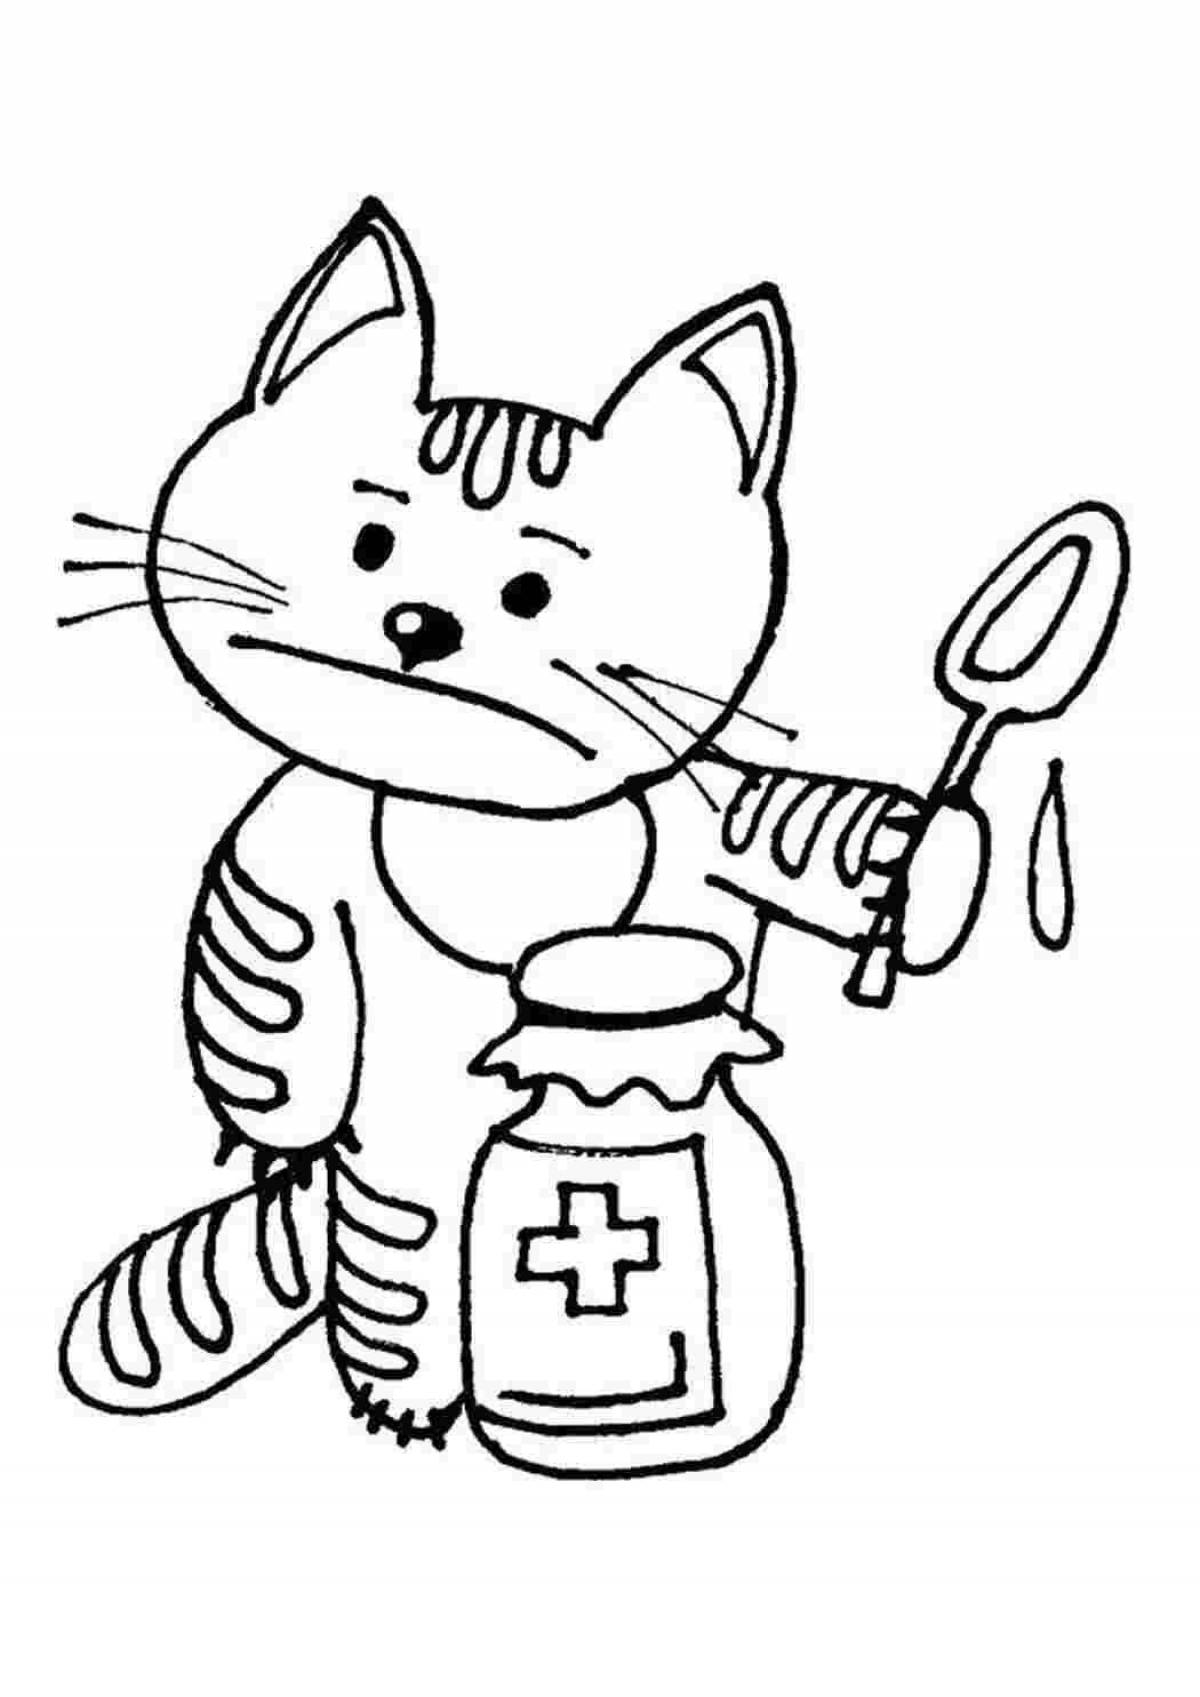 Glitter military cat coloring page